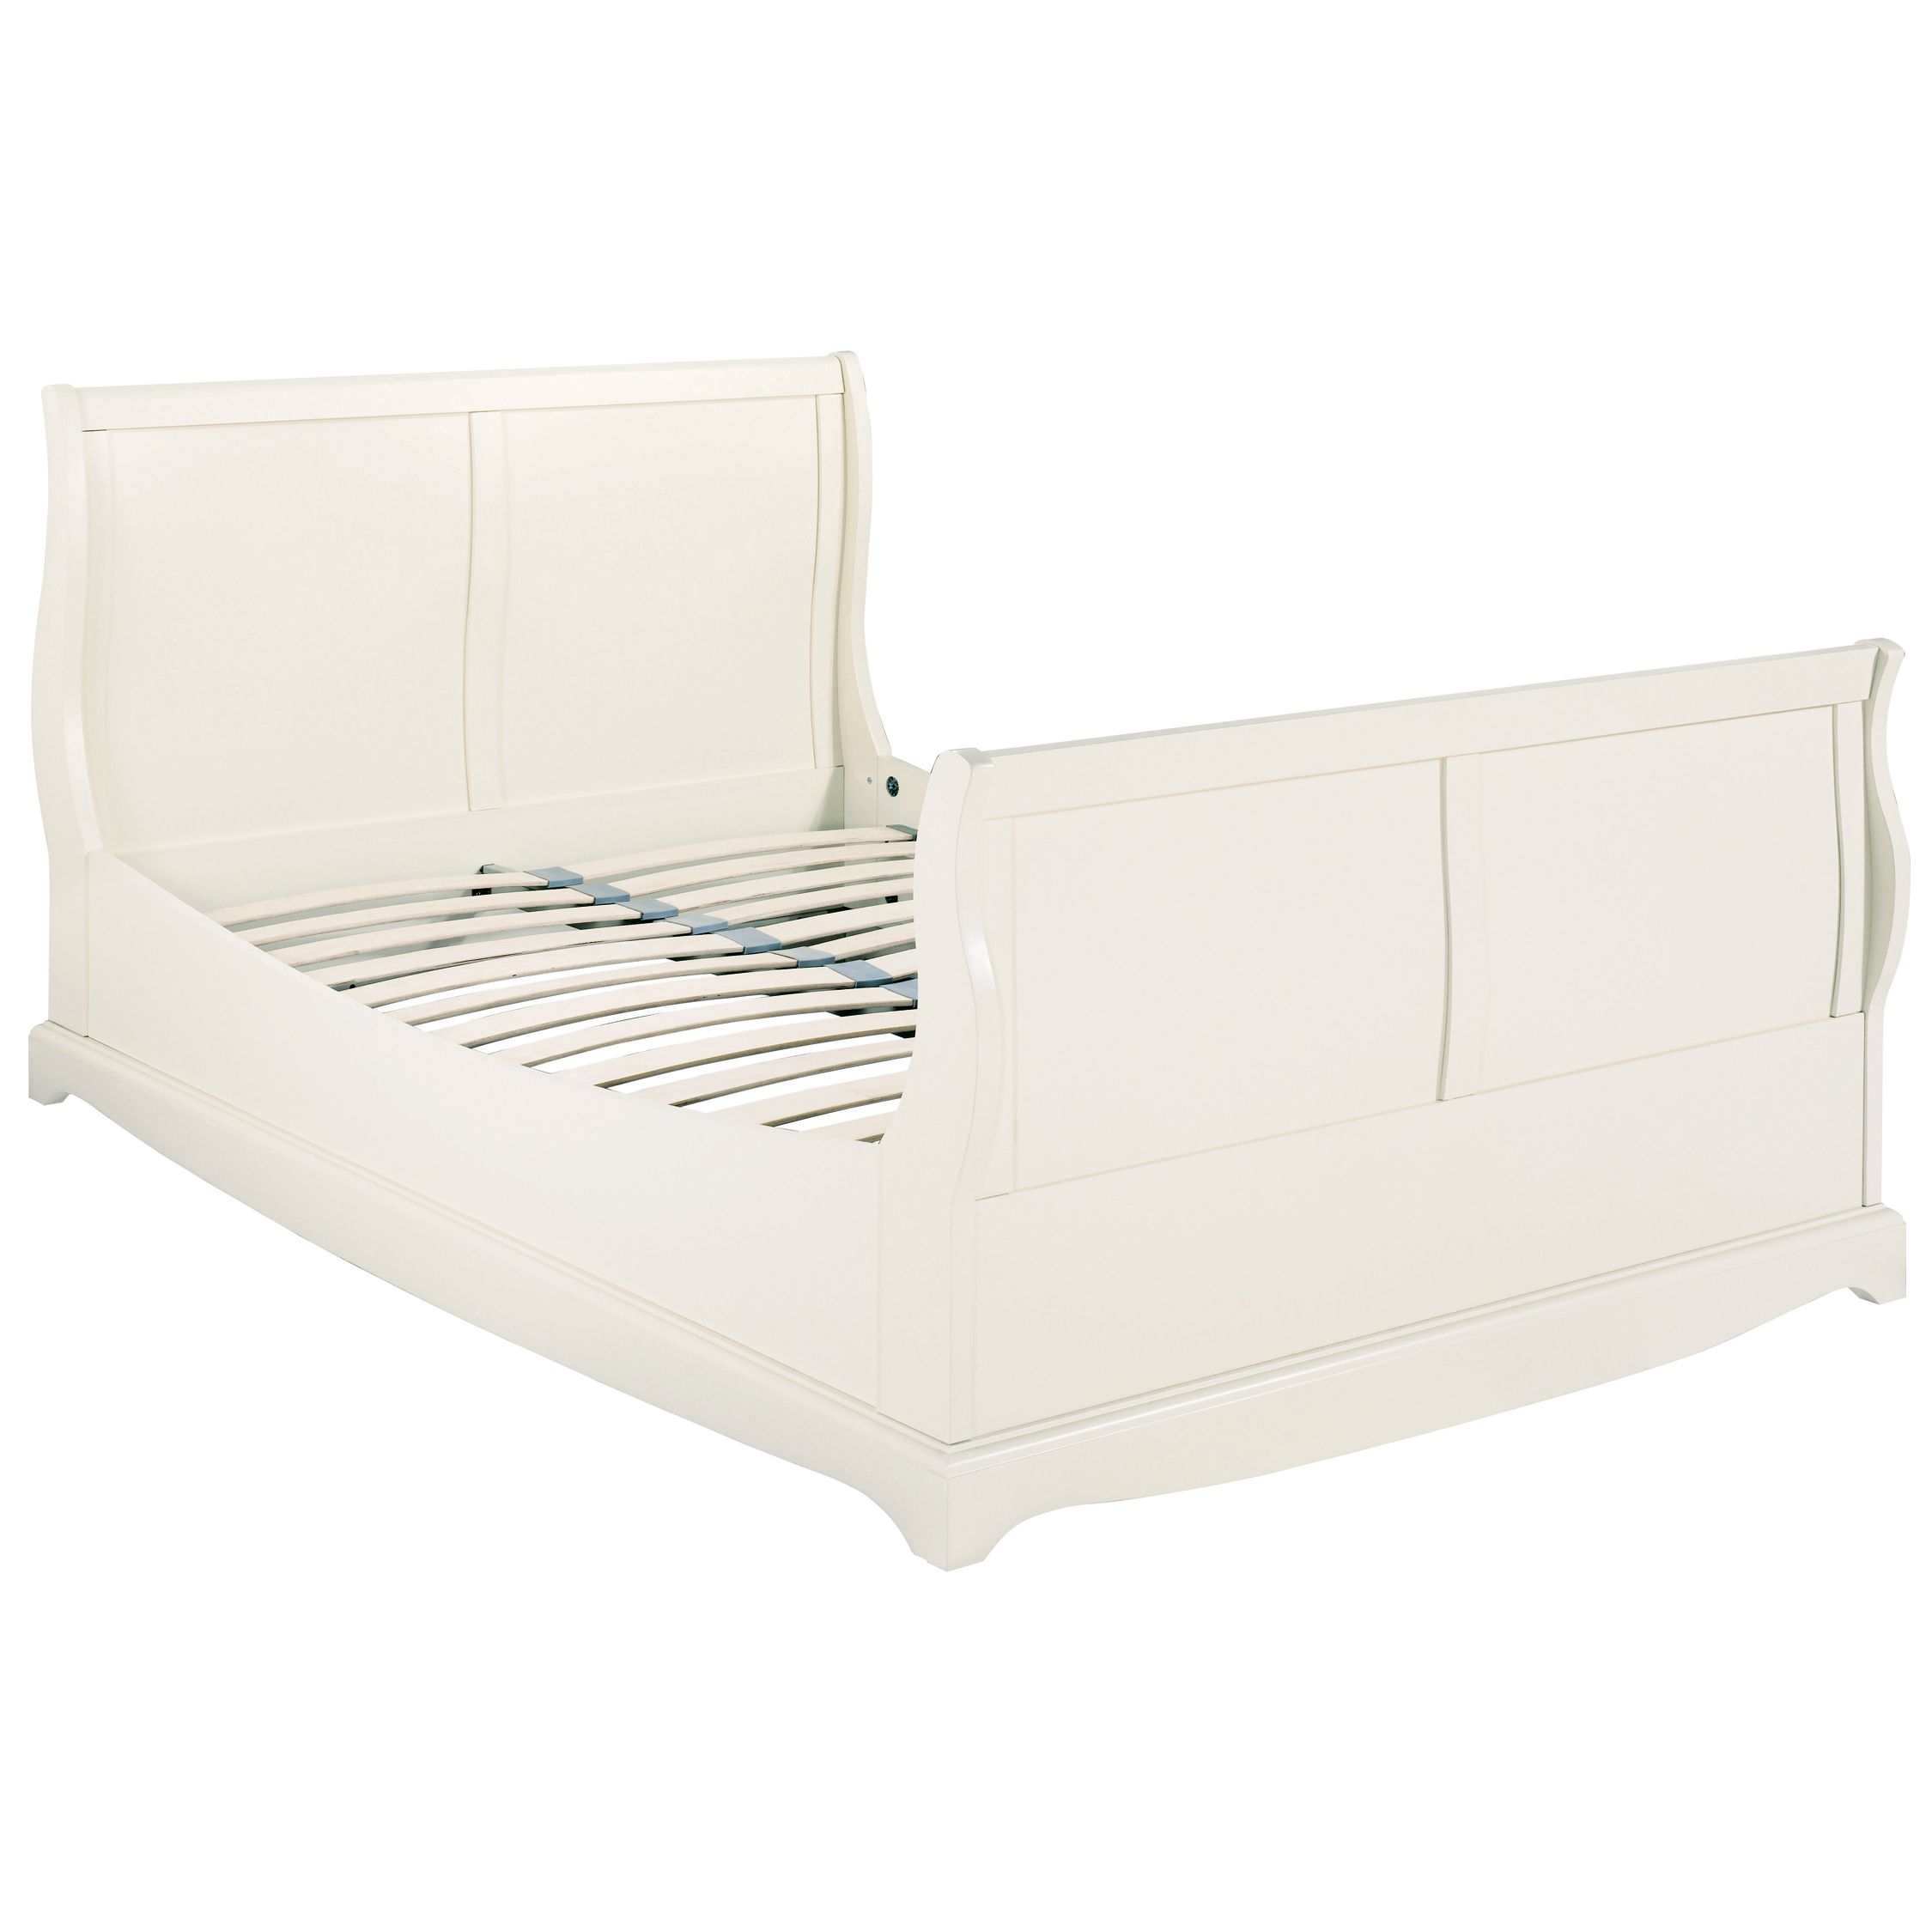 John Lewis Darcy Sleigh Bedstead, Double, Ivory